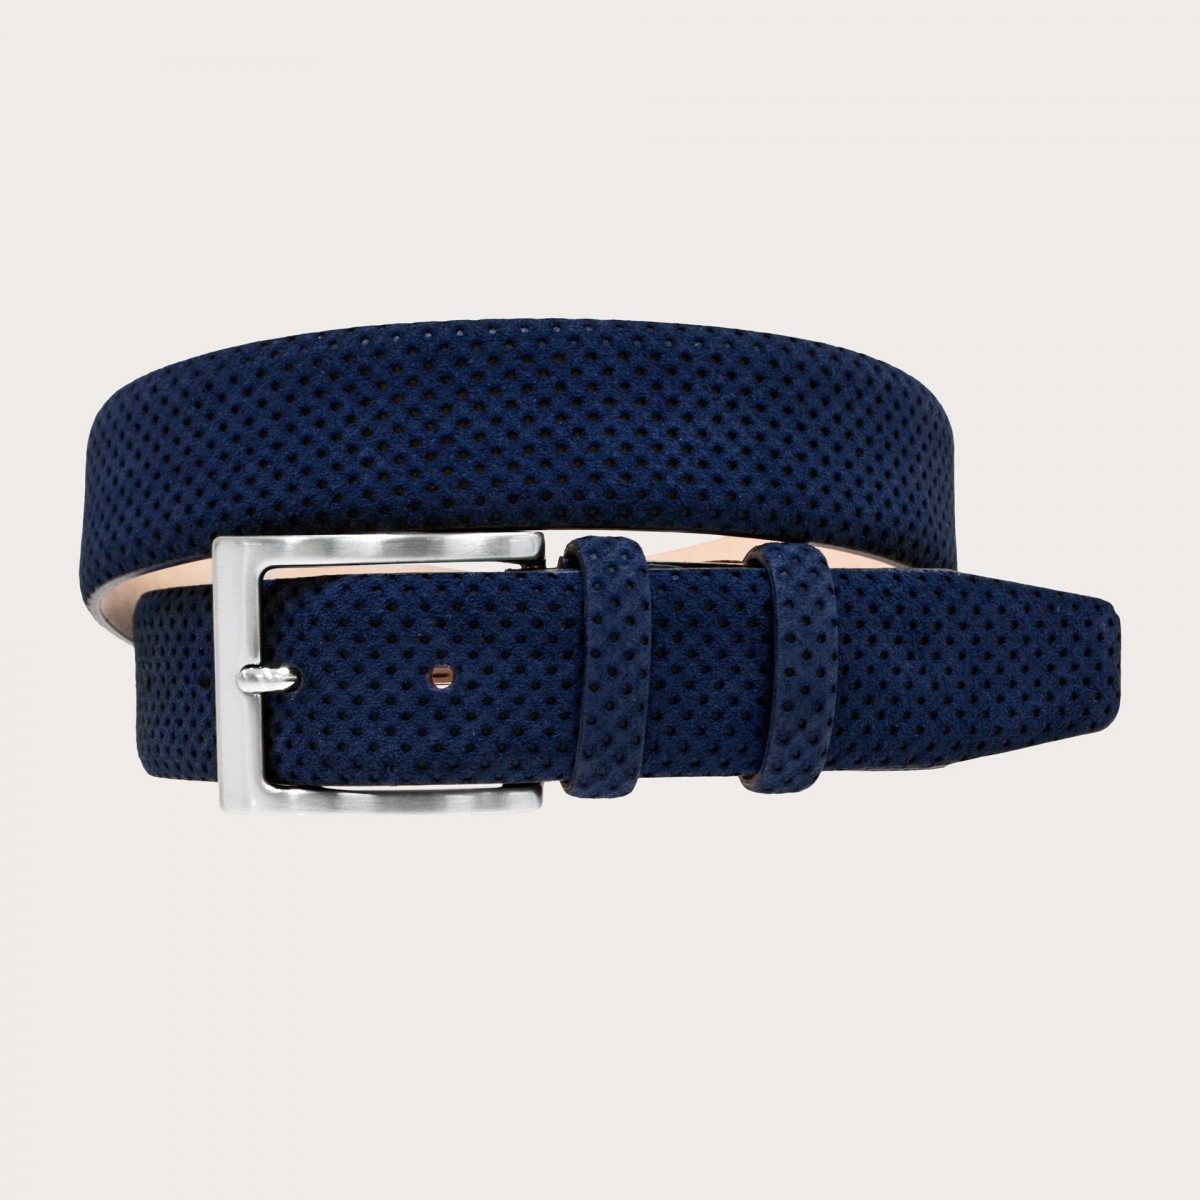 BRUCLE Blue belt in drilled pattern suede leather